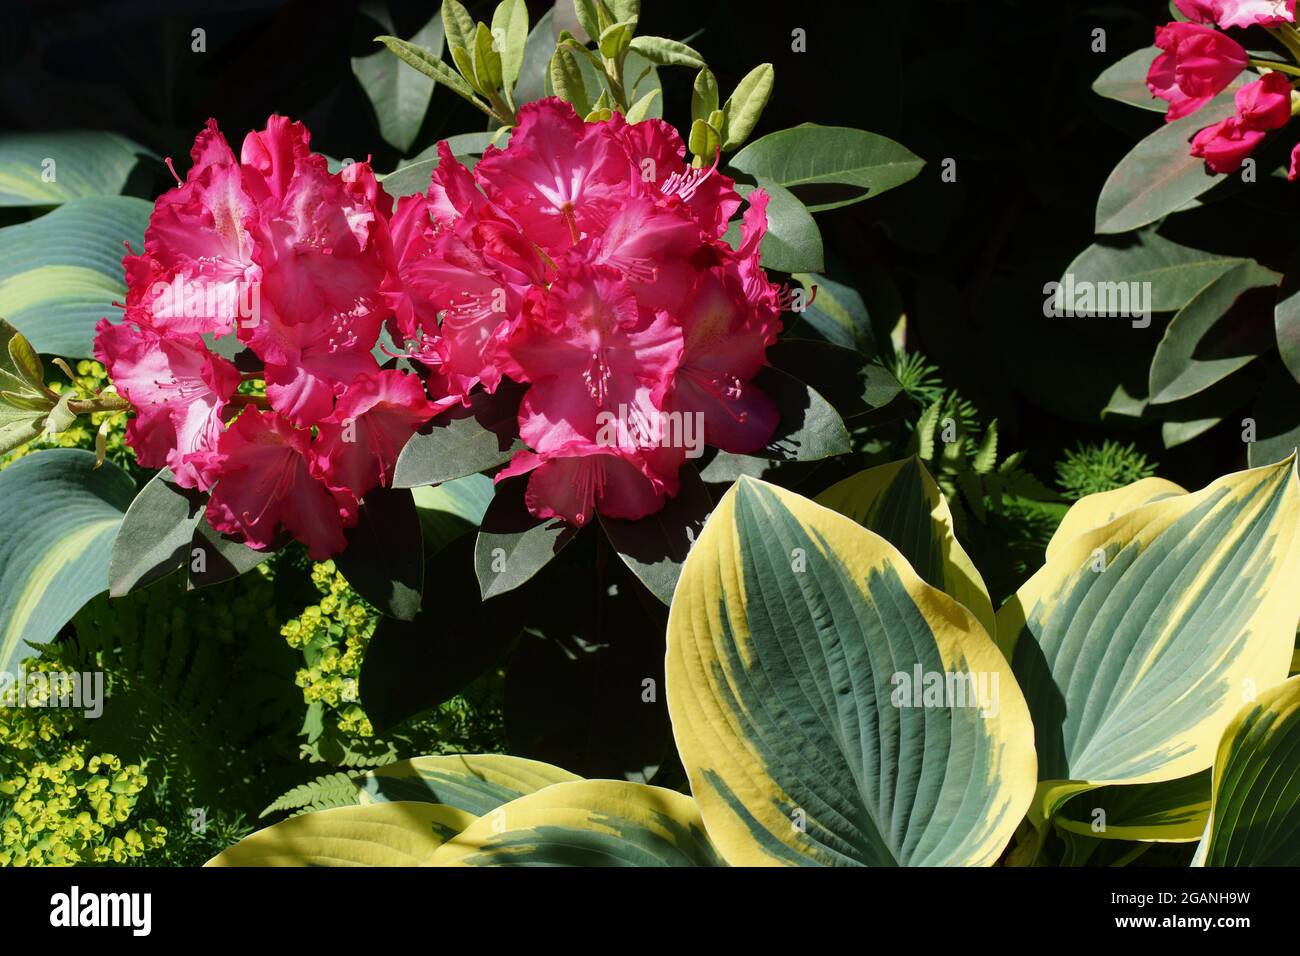 Red flowers on a green background. Rhododendrons and hosts in the garden. Rhododendron yakushimanum Fantastica. Rhododendrons and hosts in the garden. Stock Photo